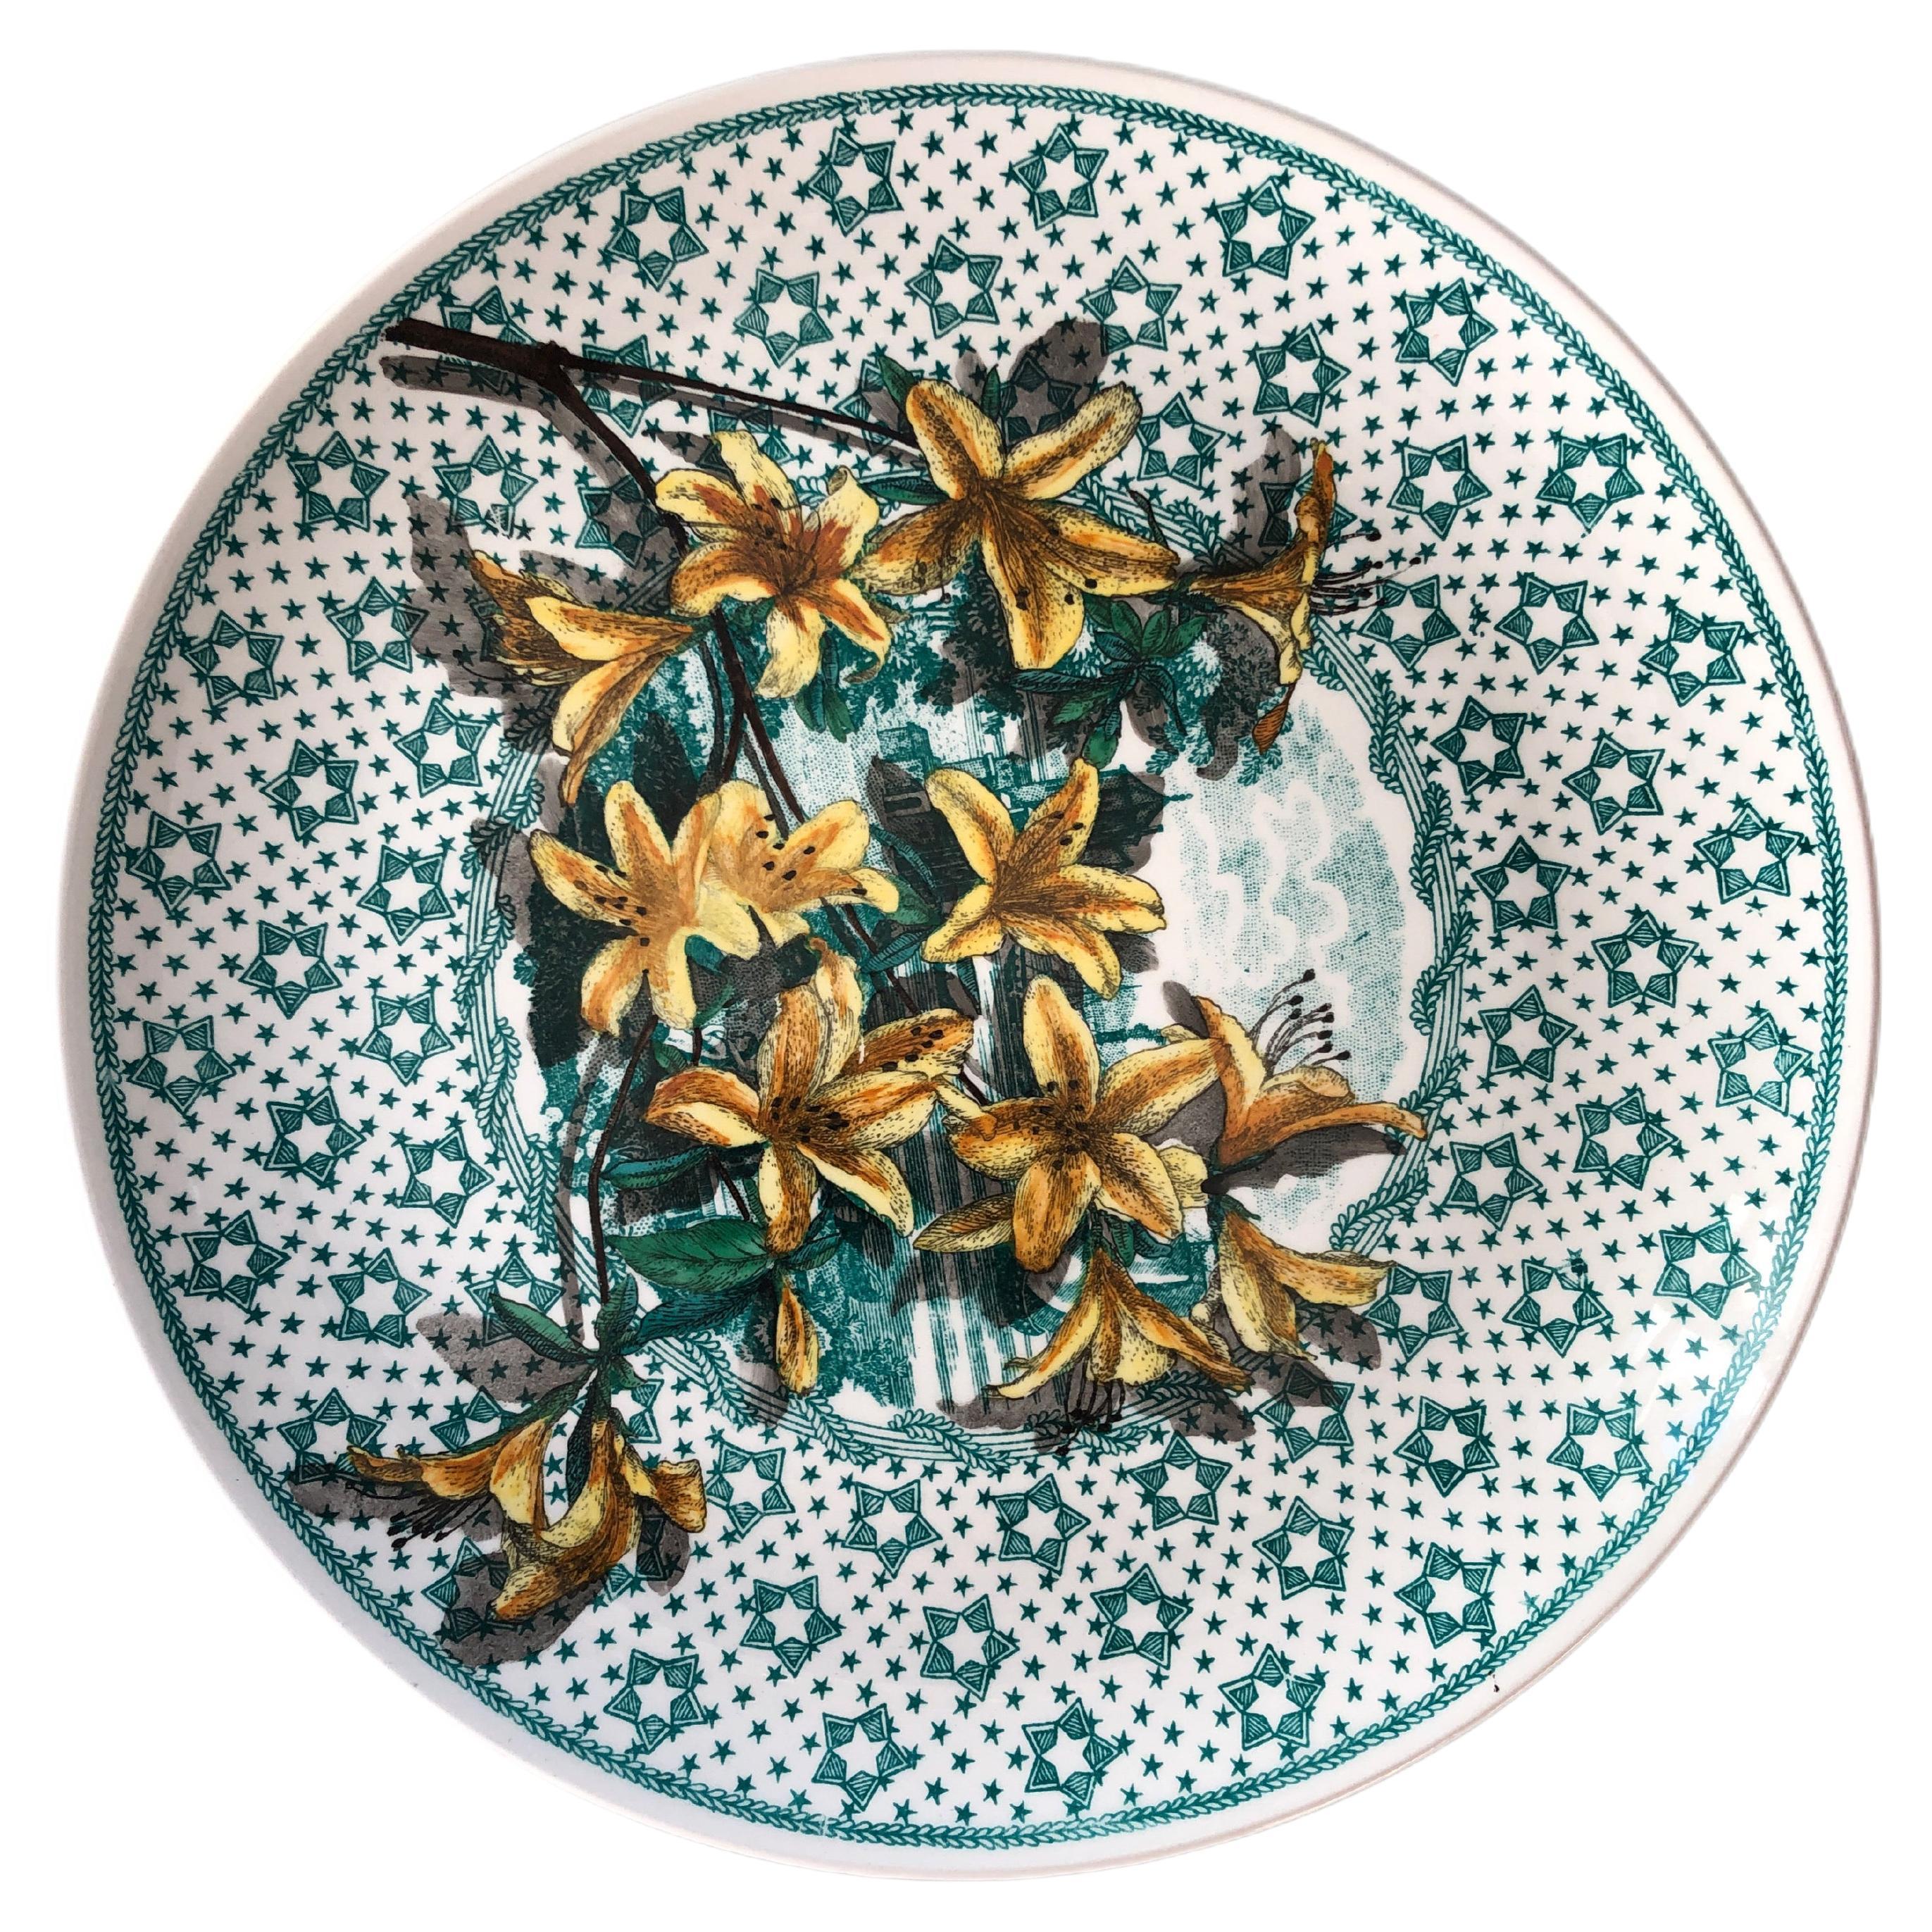 Six Mid-Century Modern Handpainted Plates by Piero Fornasetti, "Floralia", 1950s For Sale